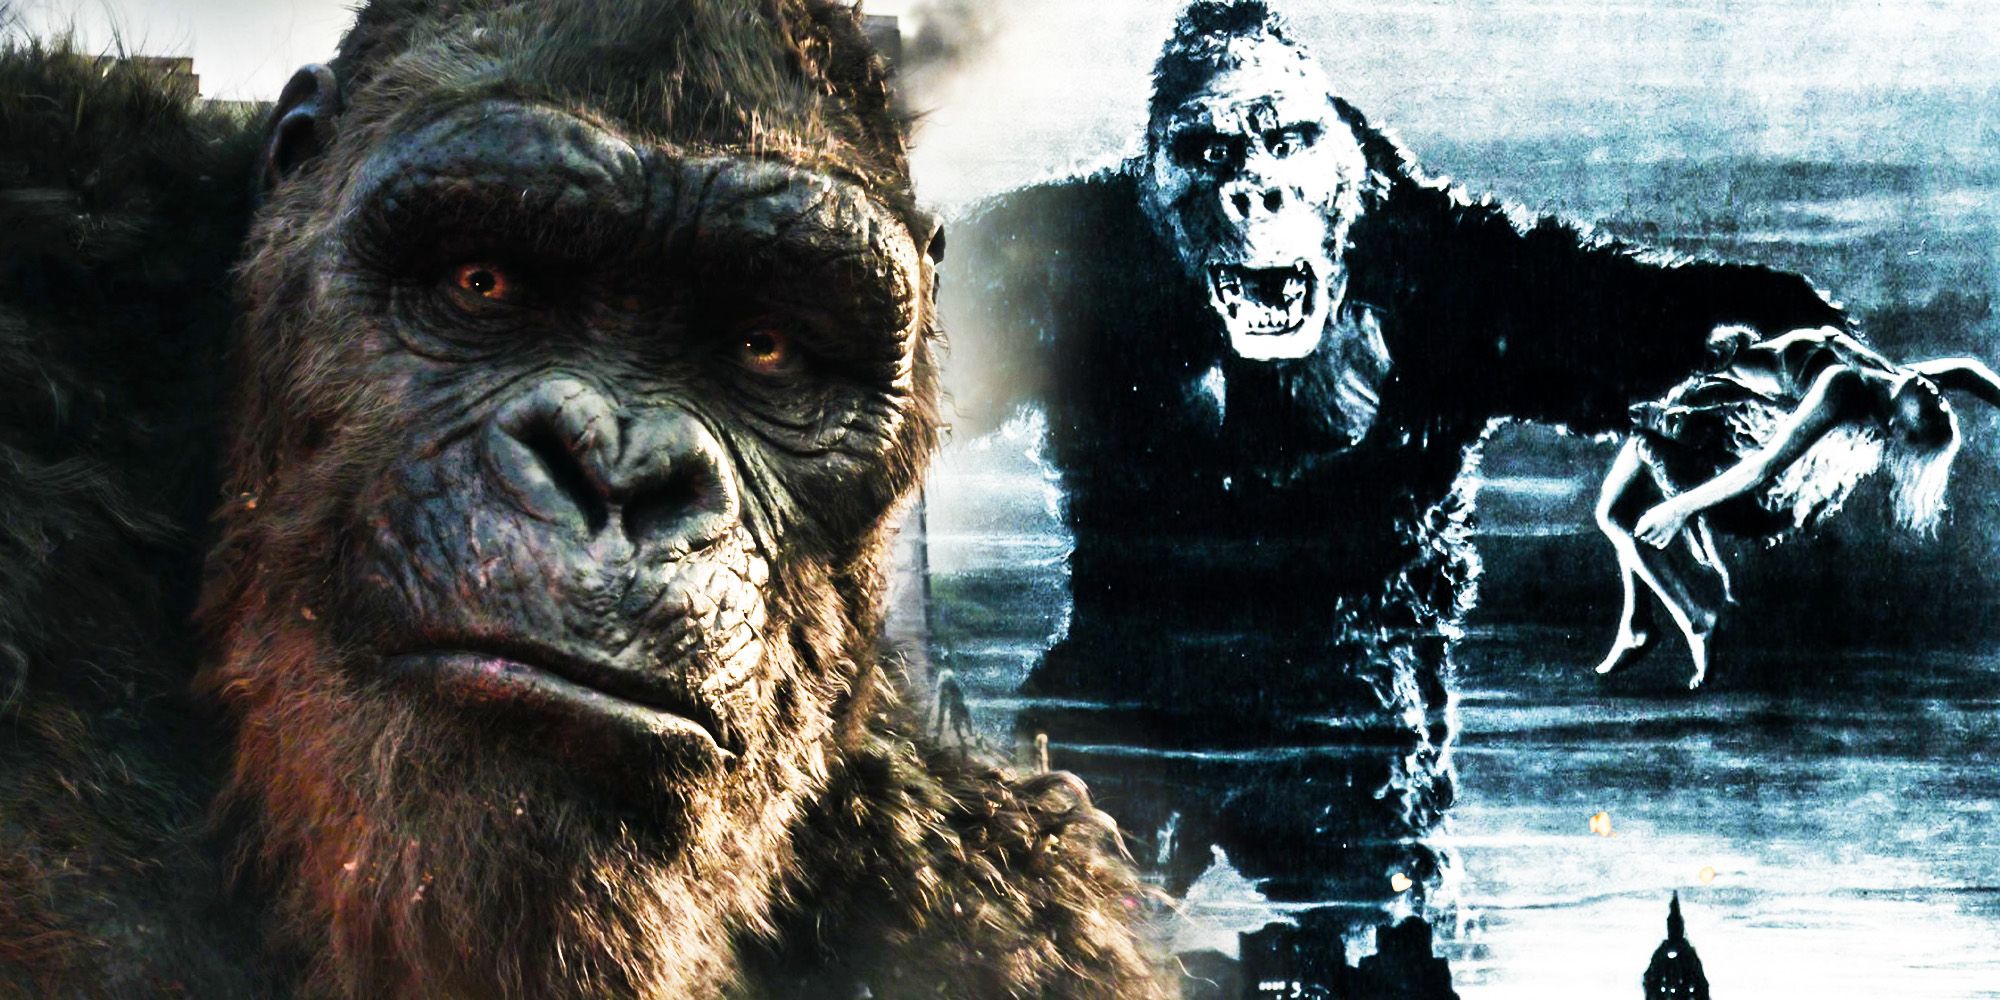 A blended image features the modern King Kong and the classic King Kong